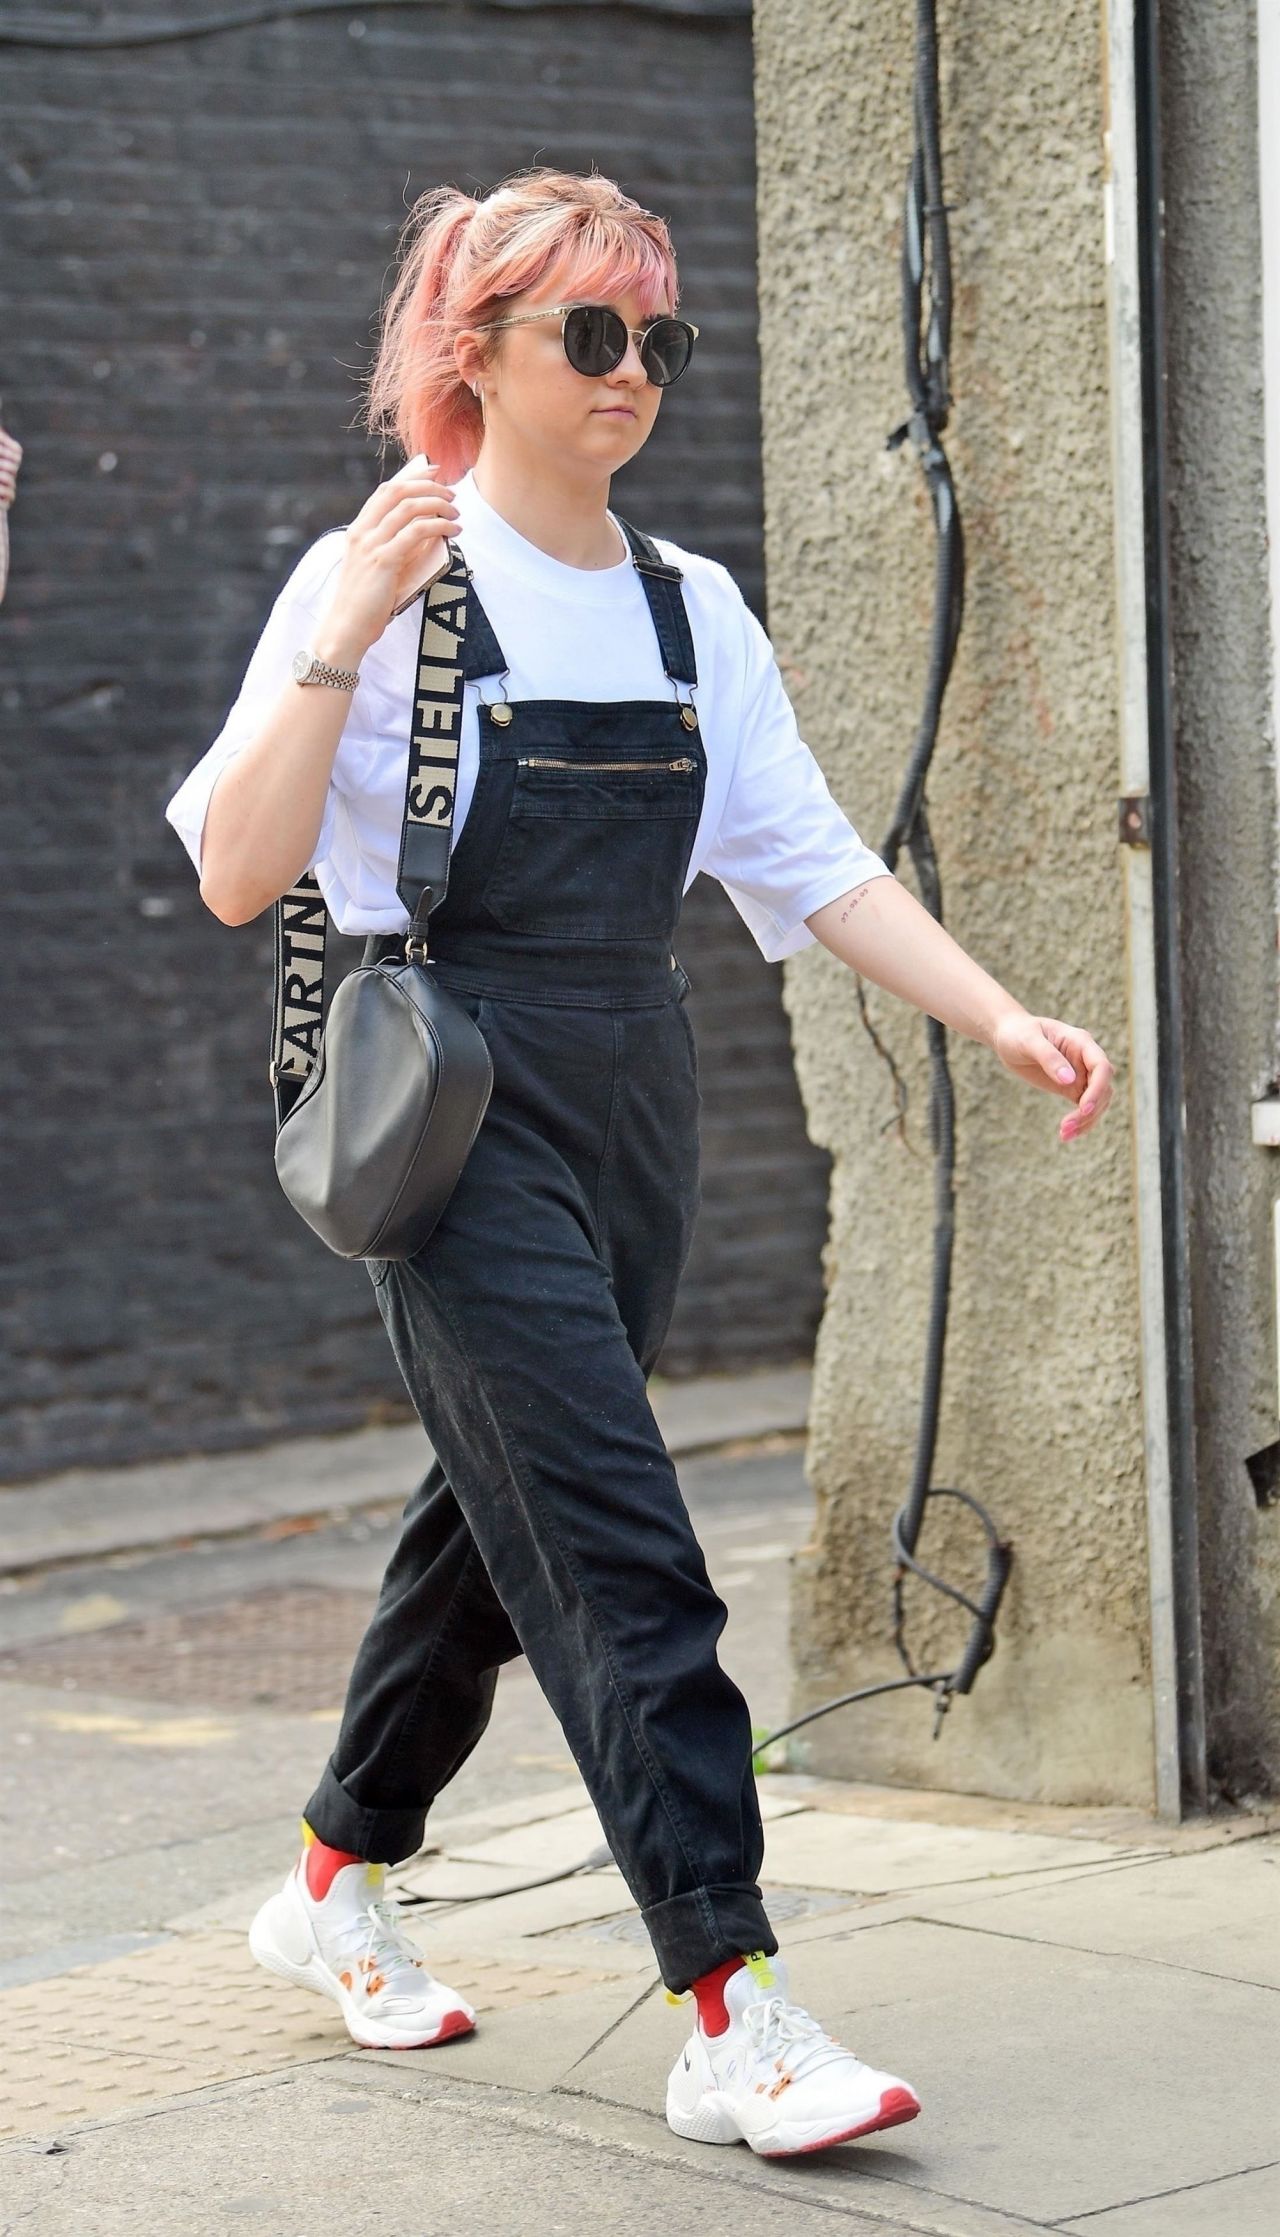 maisie-williams-out-in-london-07-17-2019-0.jpg